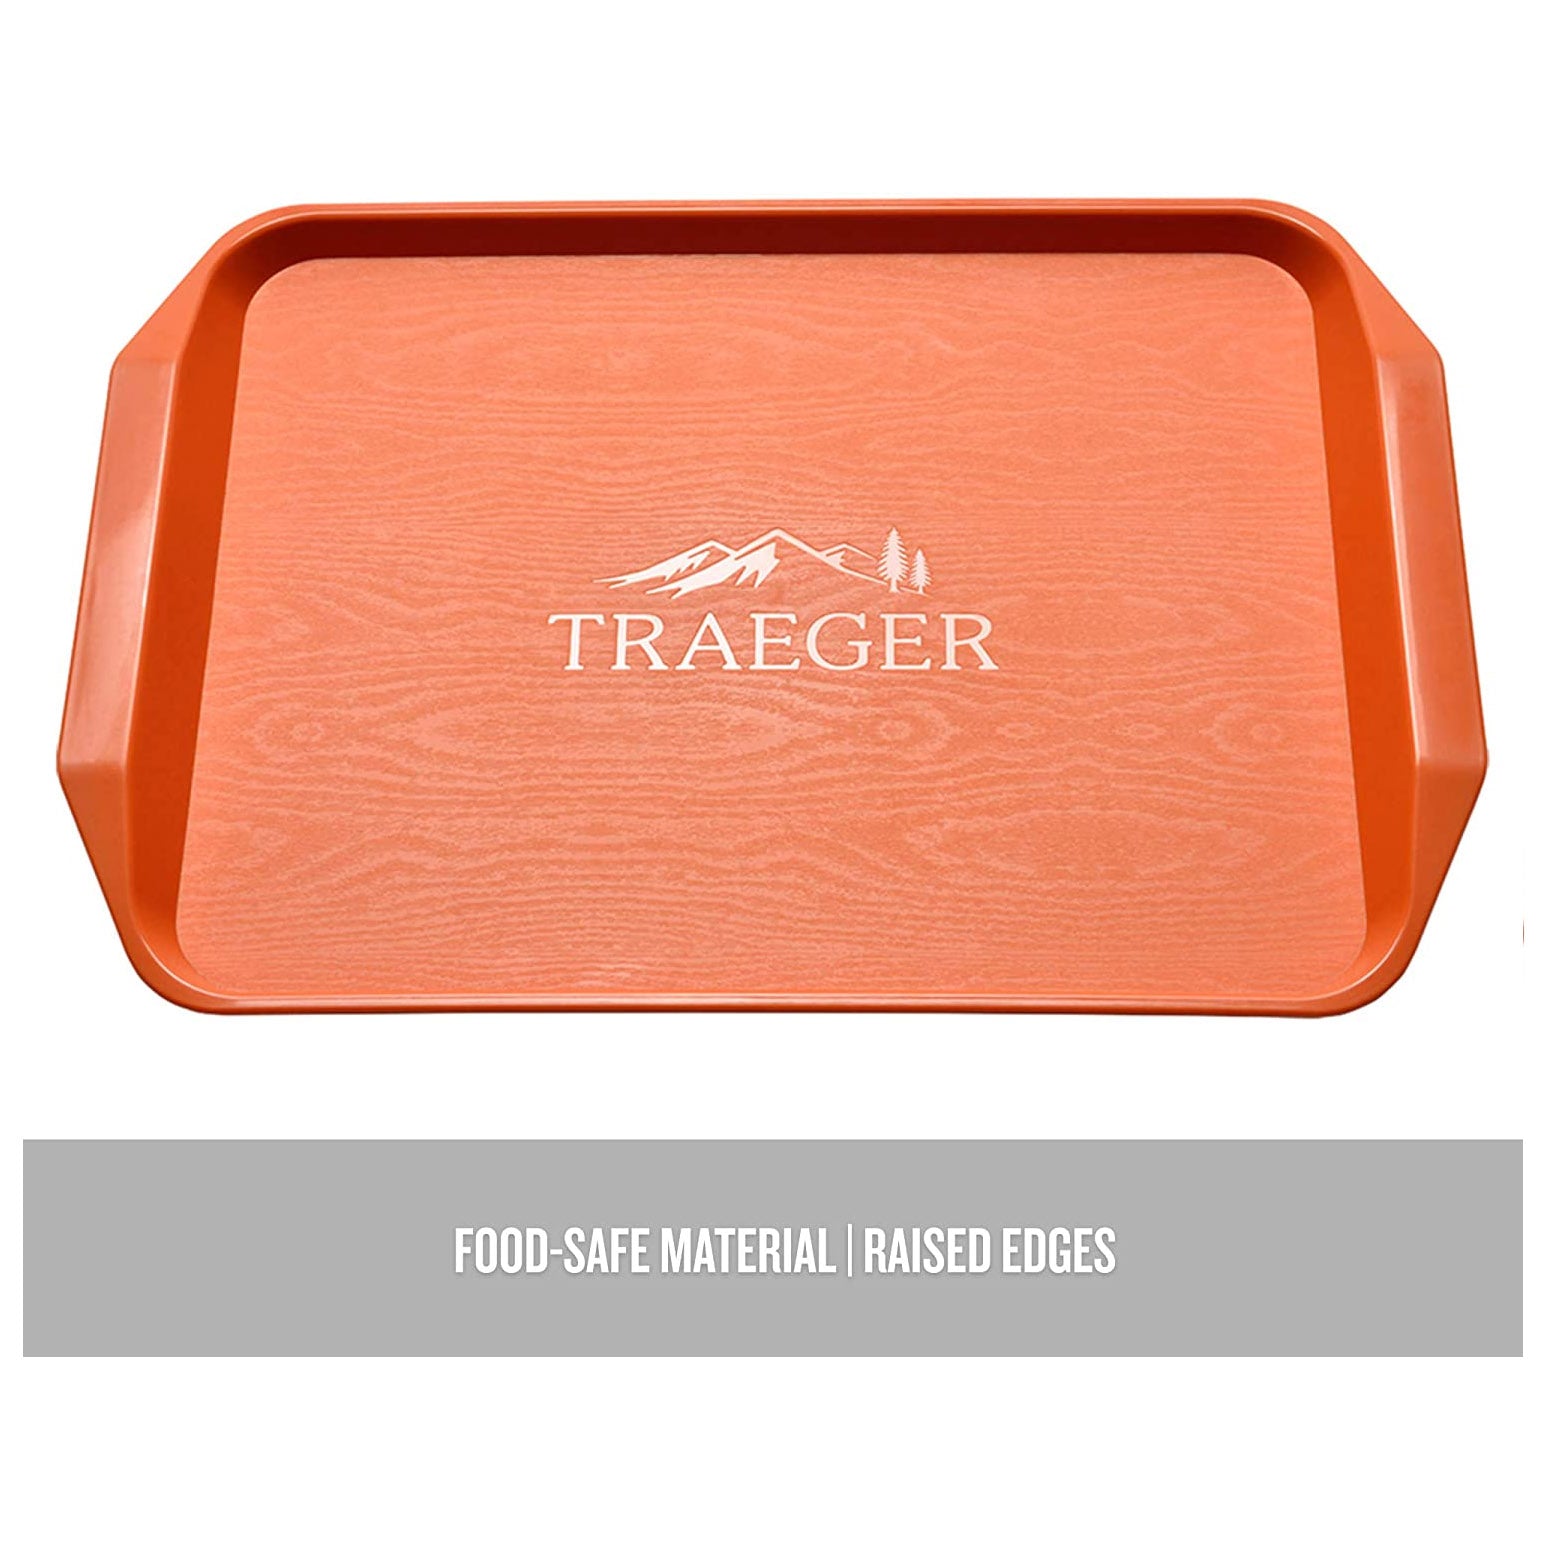 Traeger BBQ Food Tray For Serving, Prepping, or Resting Orange BAC426